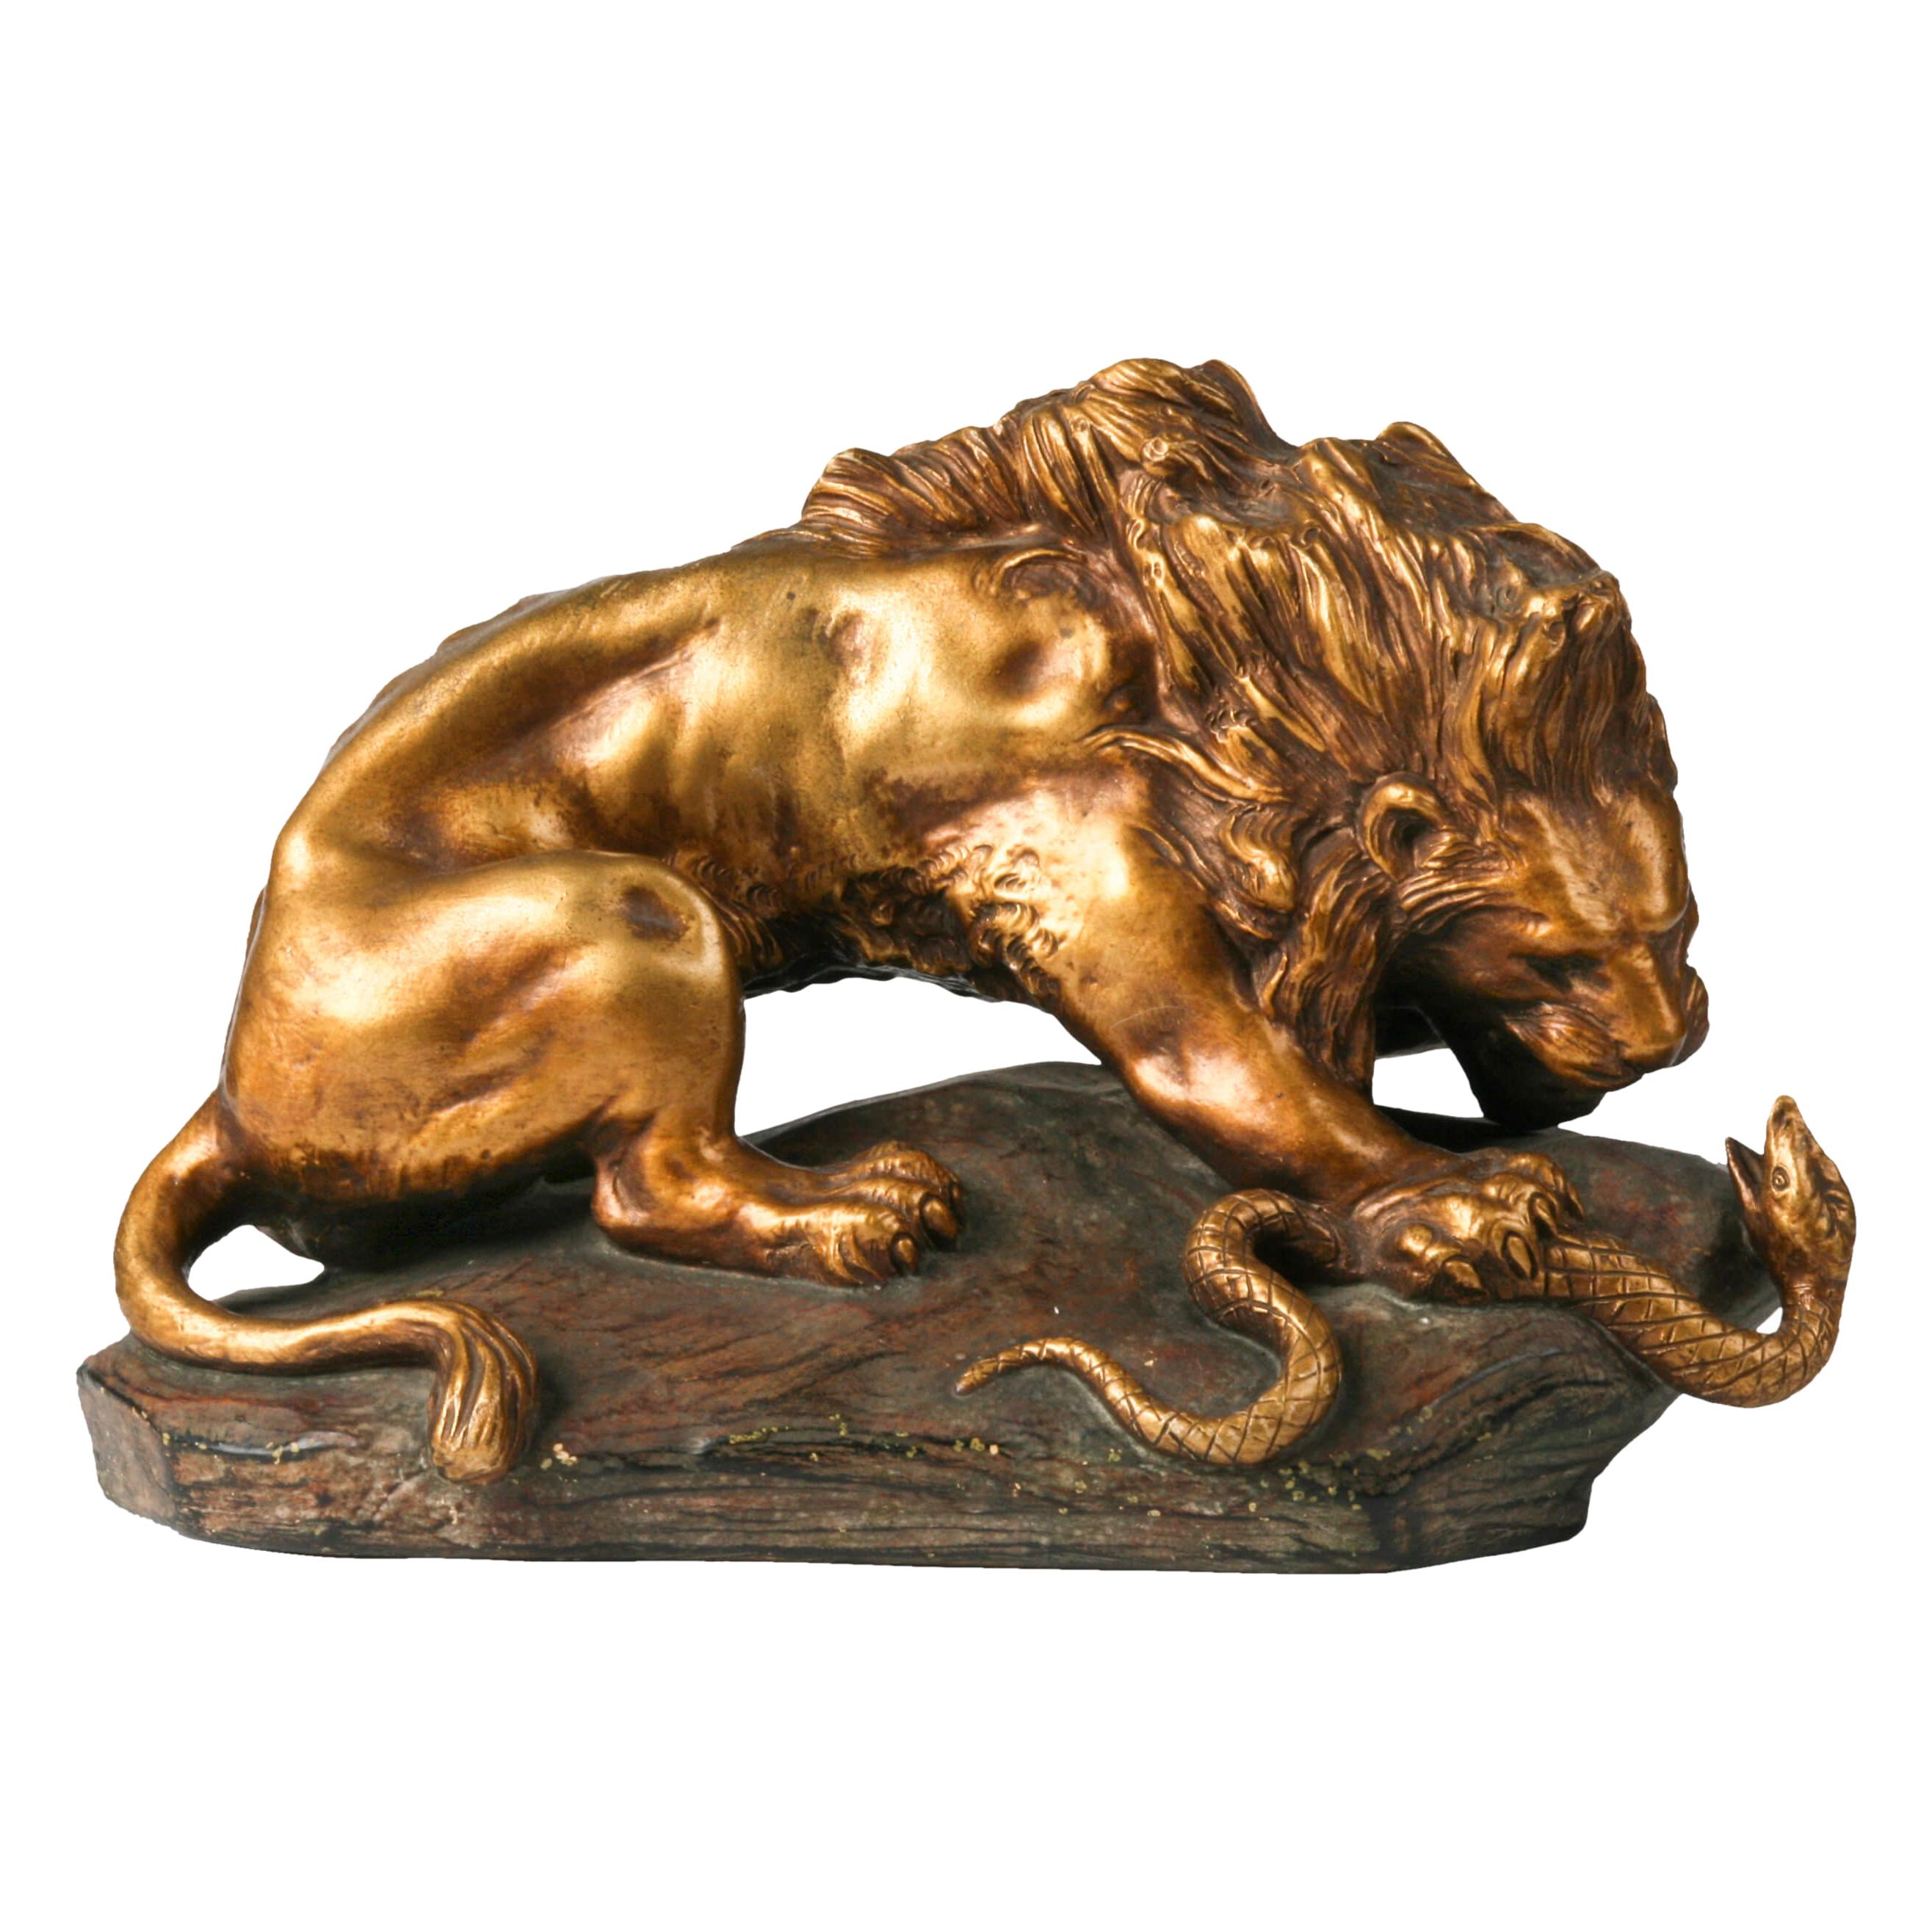 Terracotta Statue Lion Fighting Snake by A. Fagotto, 1920-1930